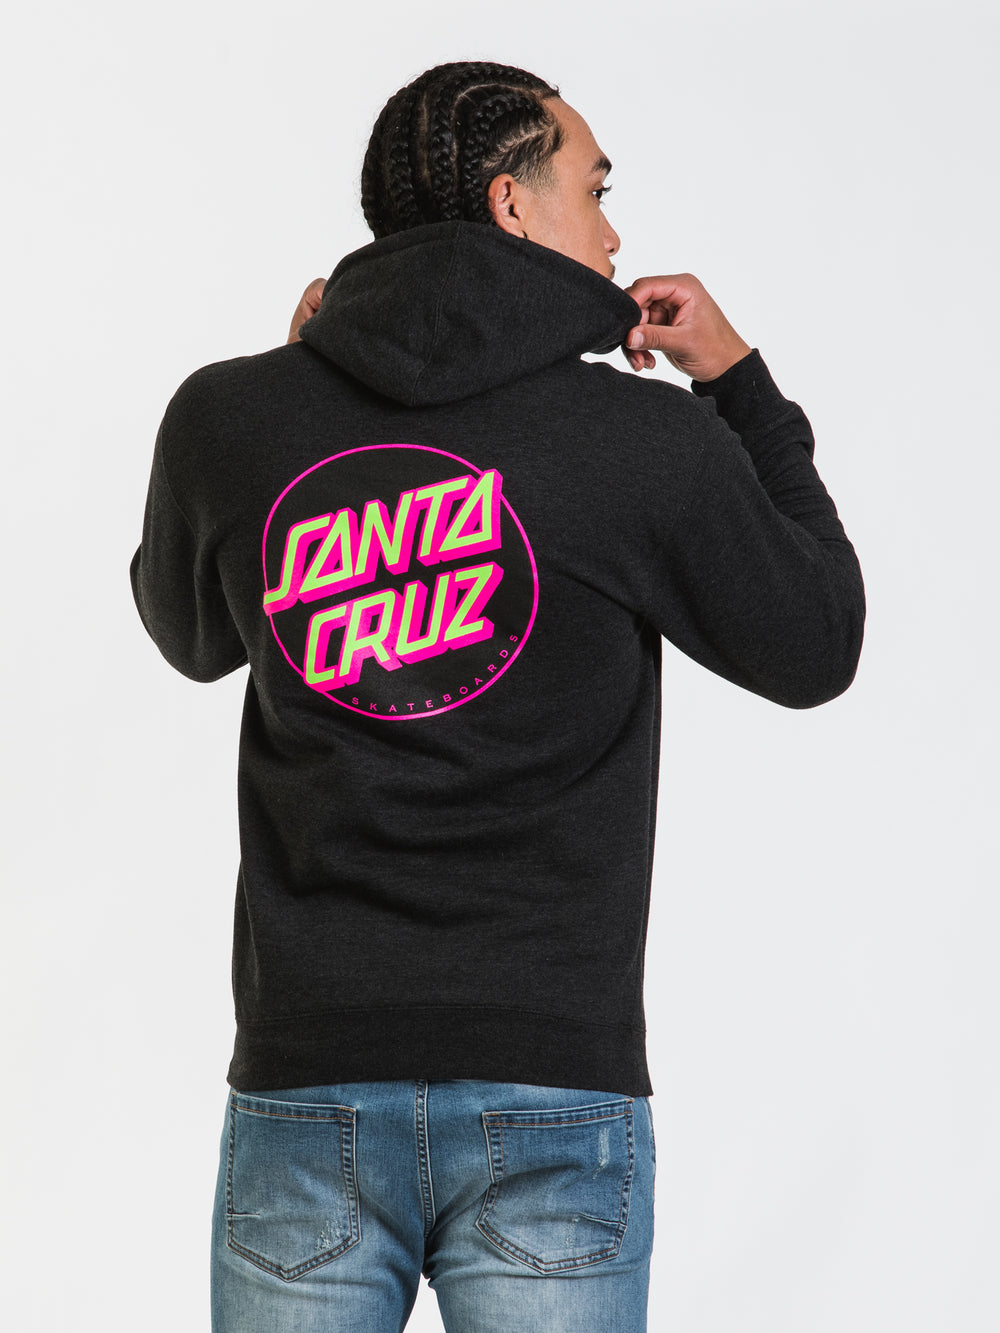 SANTA CRUZ OTHER DOT PULL OVER HOODIE - CLEARANCE